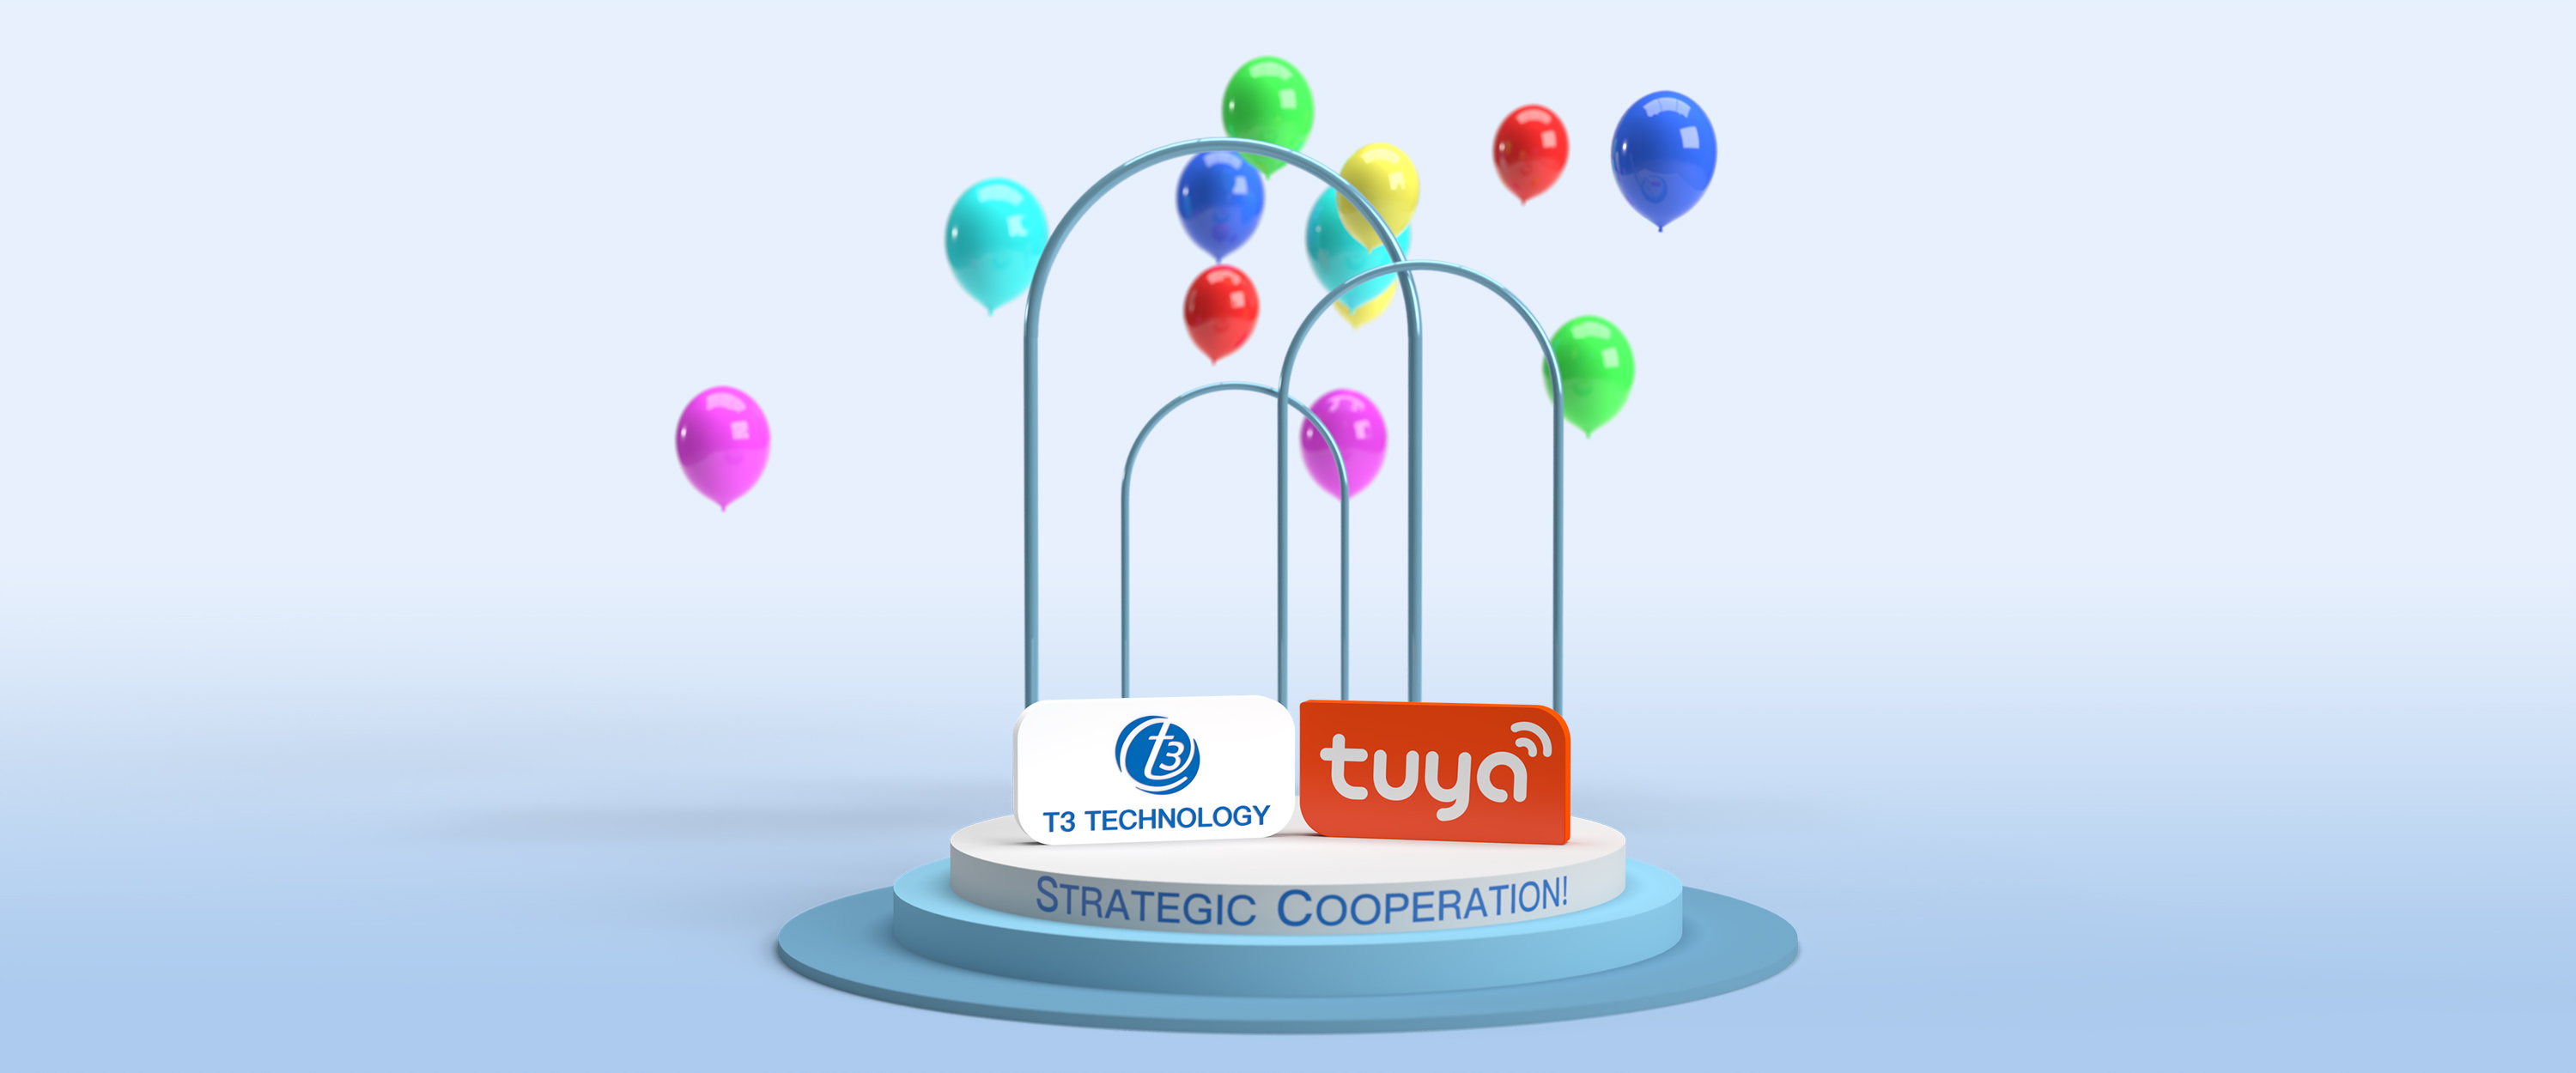 T3 Technology and Tuya Smart Strategic Cooperation Agreement